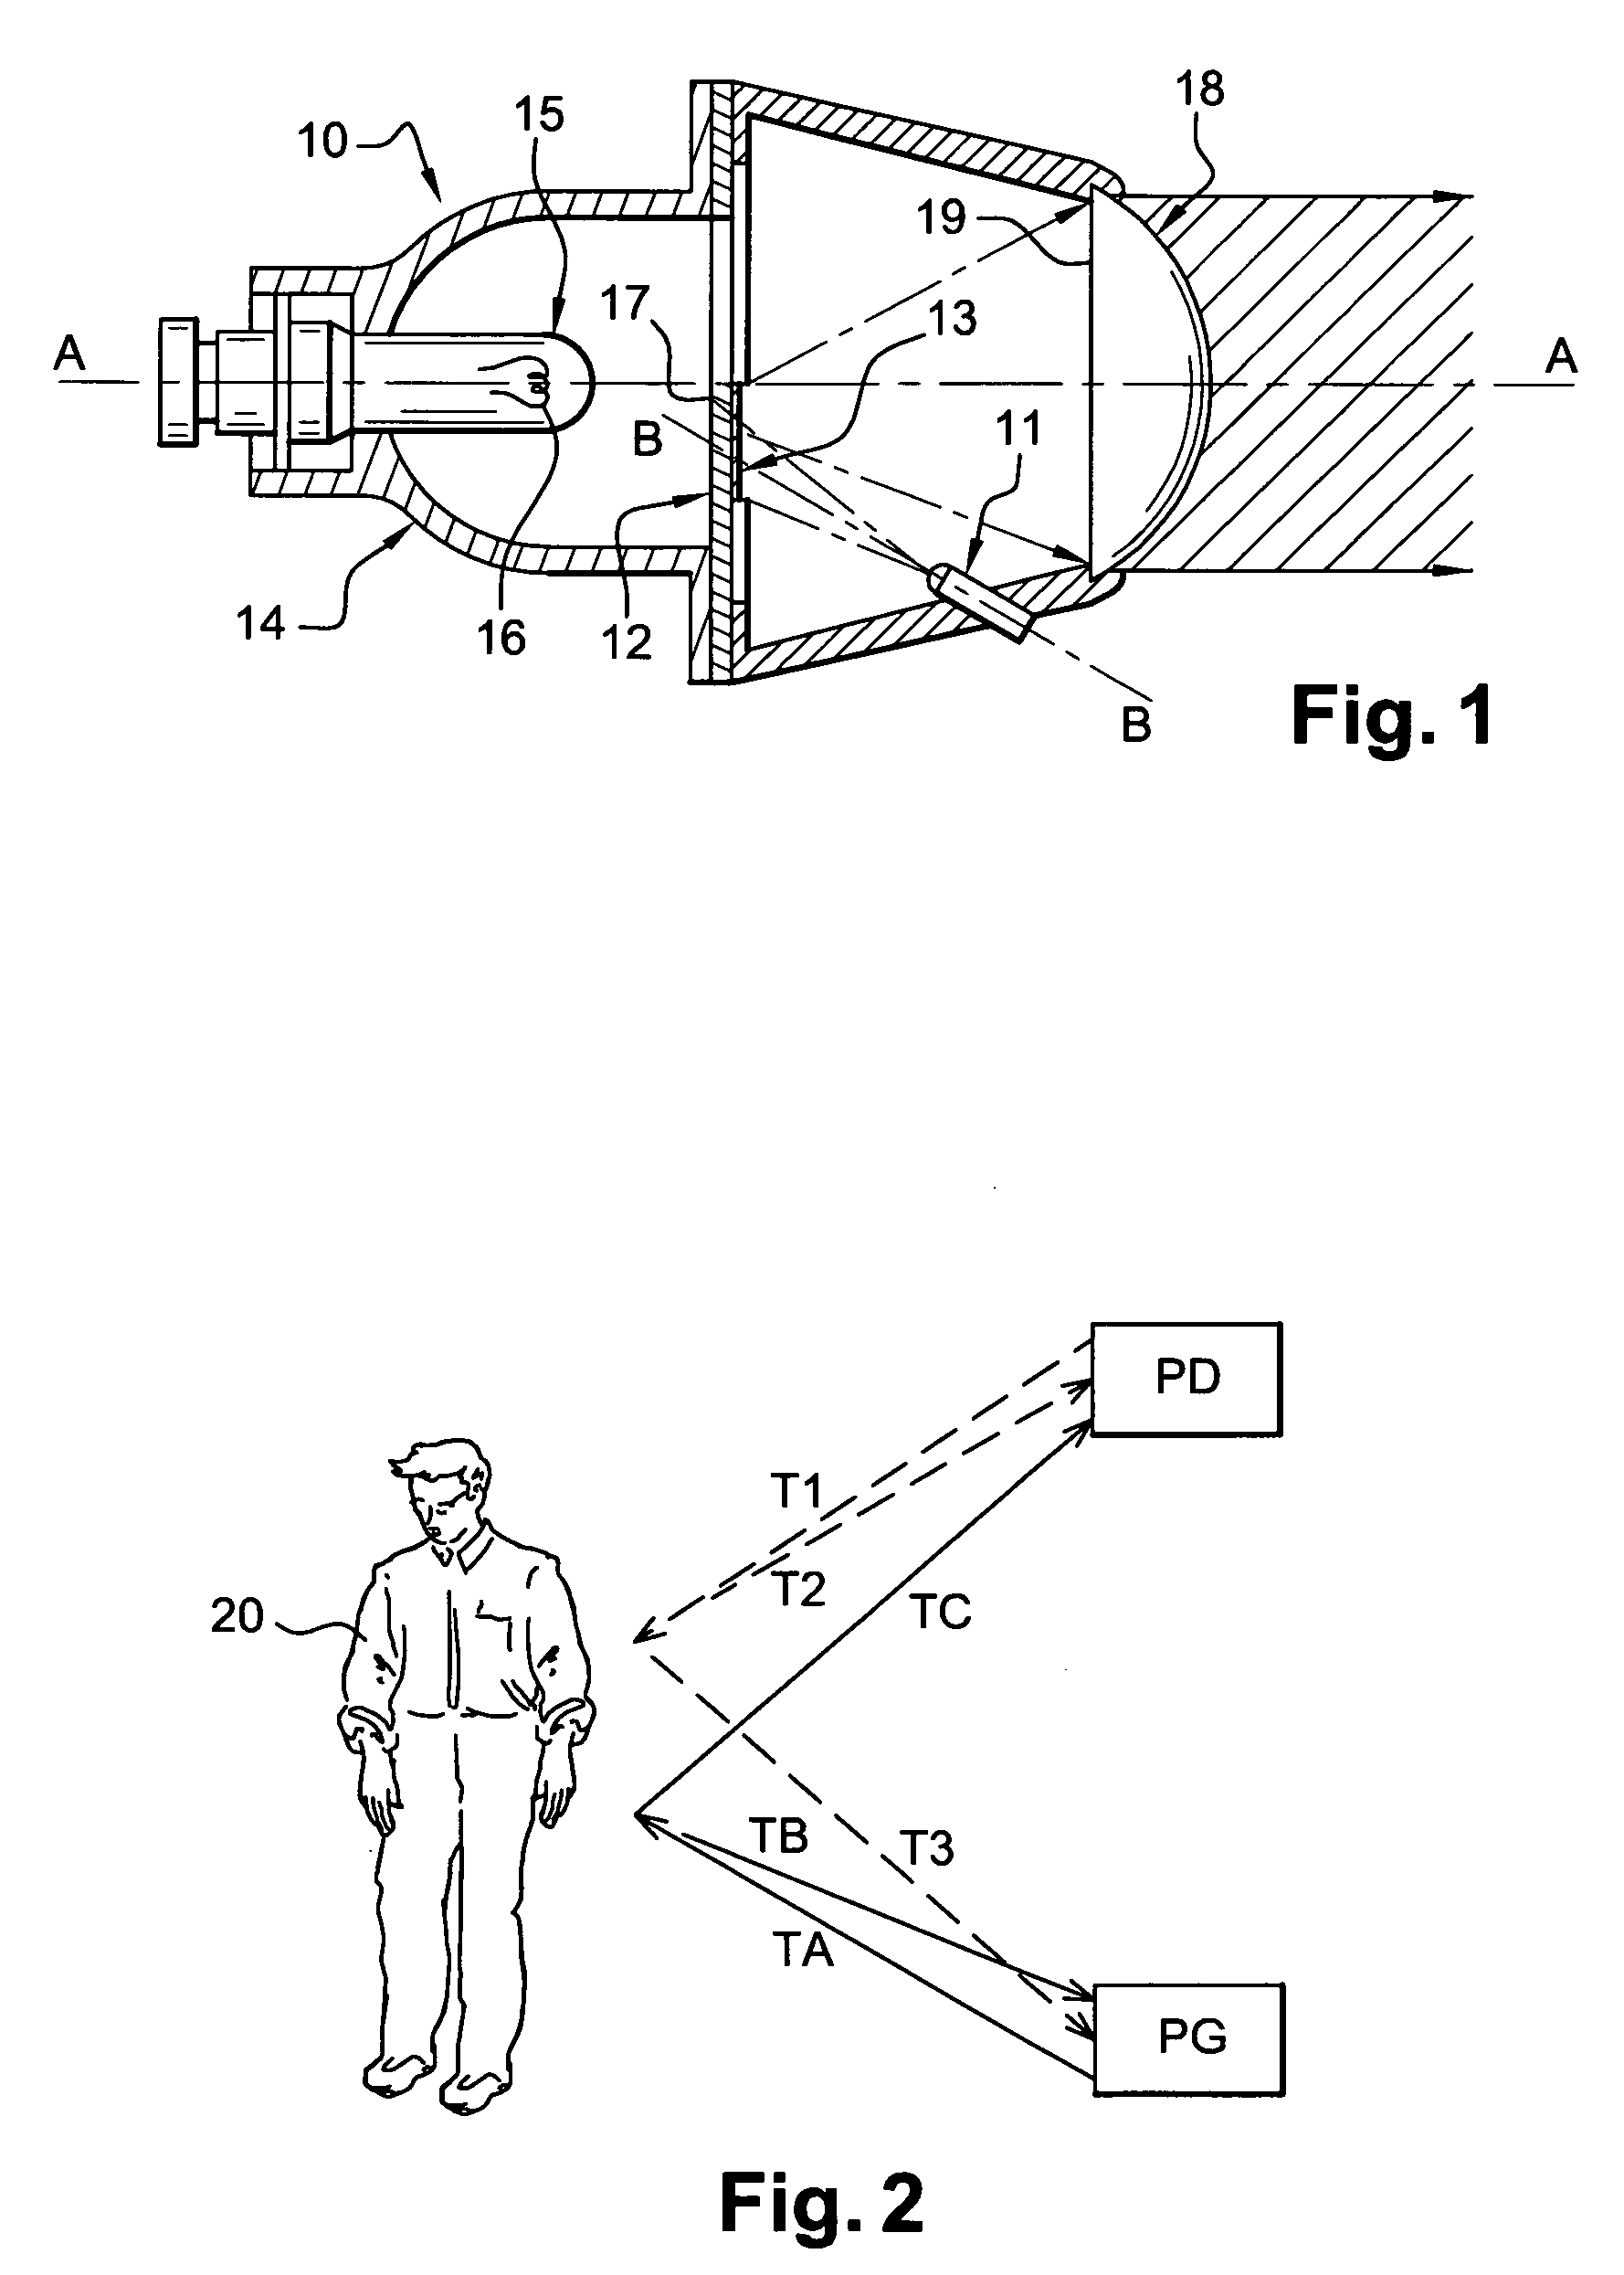 System and method of detecting driving conditions for a motor vehicle